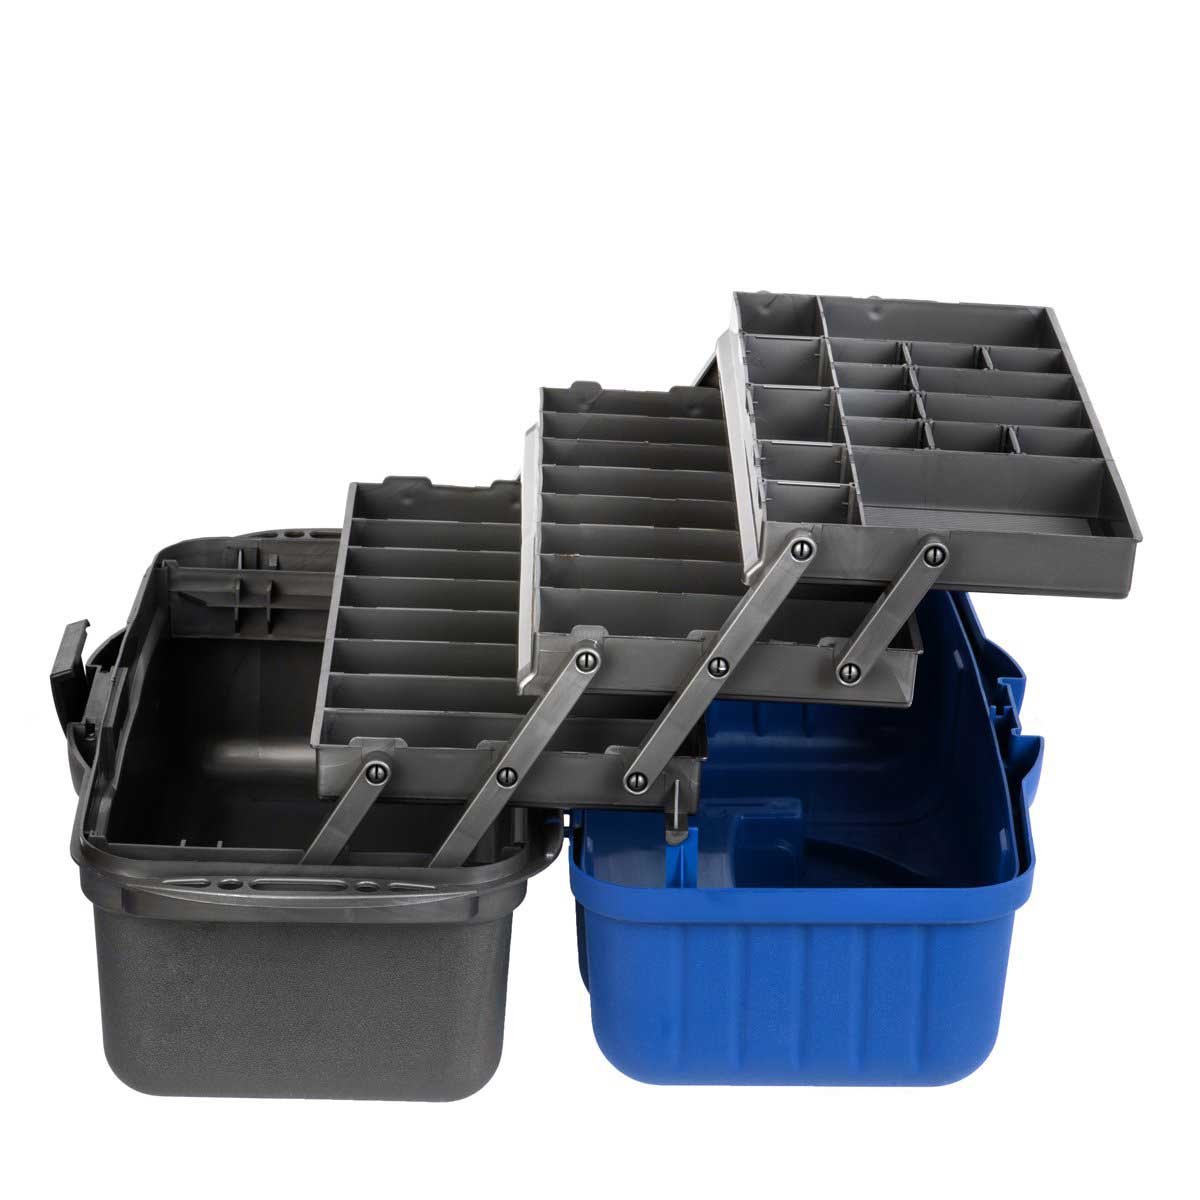 Waterproof Without Trays Tackle Box, Large Storage Fishing Gear